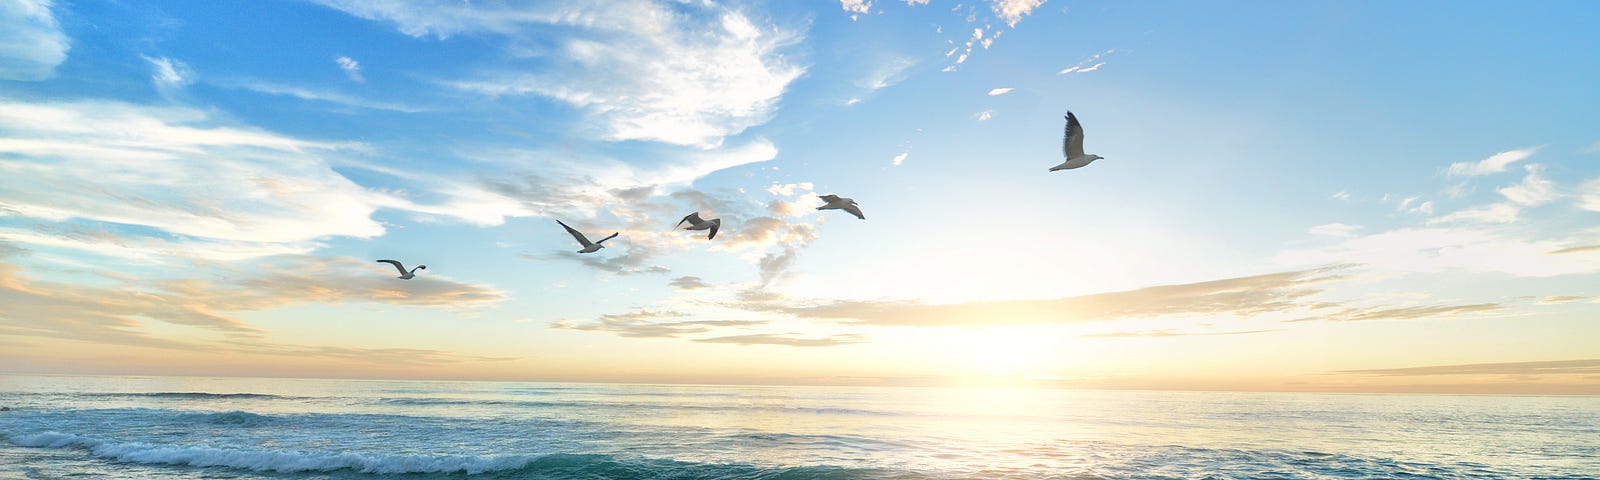 Five seagulls flying low over the ocean and beach at sunrise.